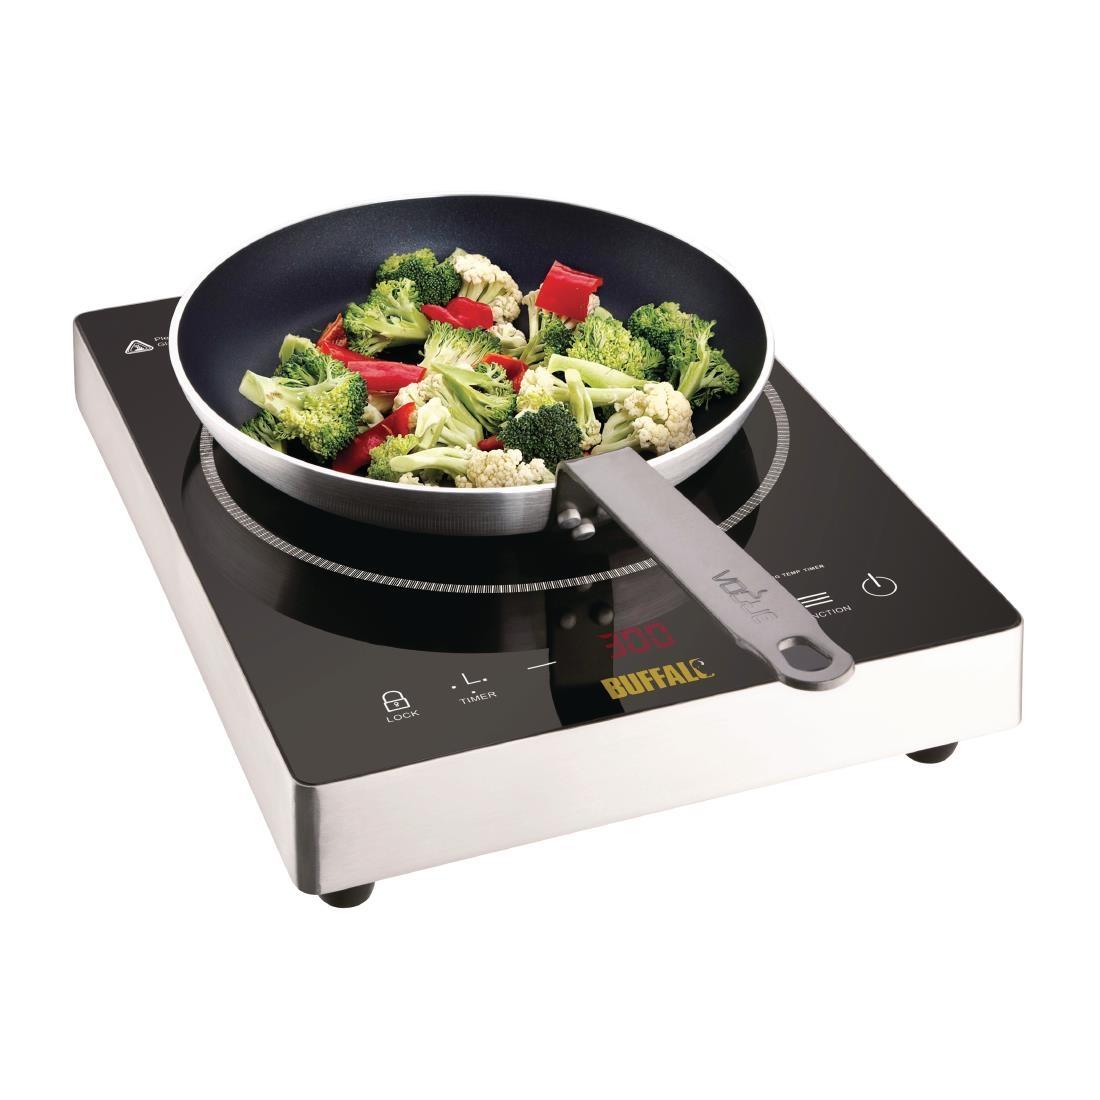 Buffalo Touch Control Single Induction Hob 3kW - DF825  - 4